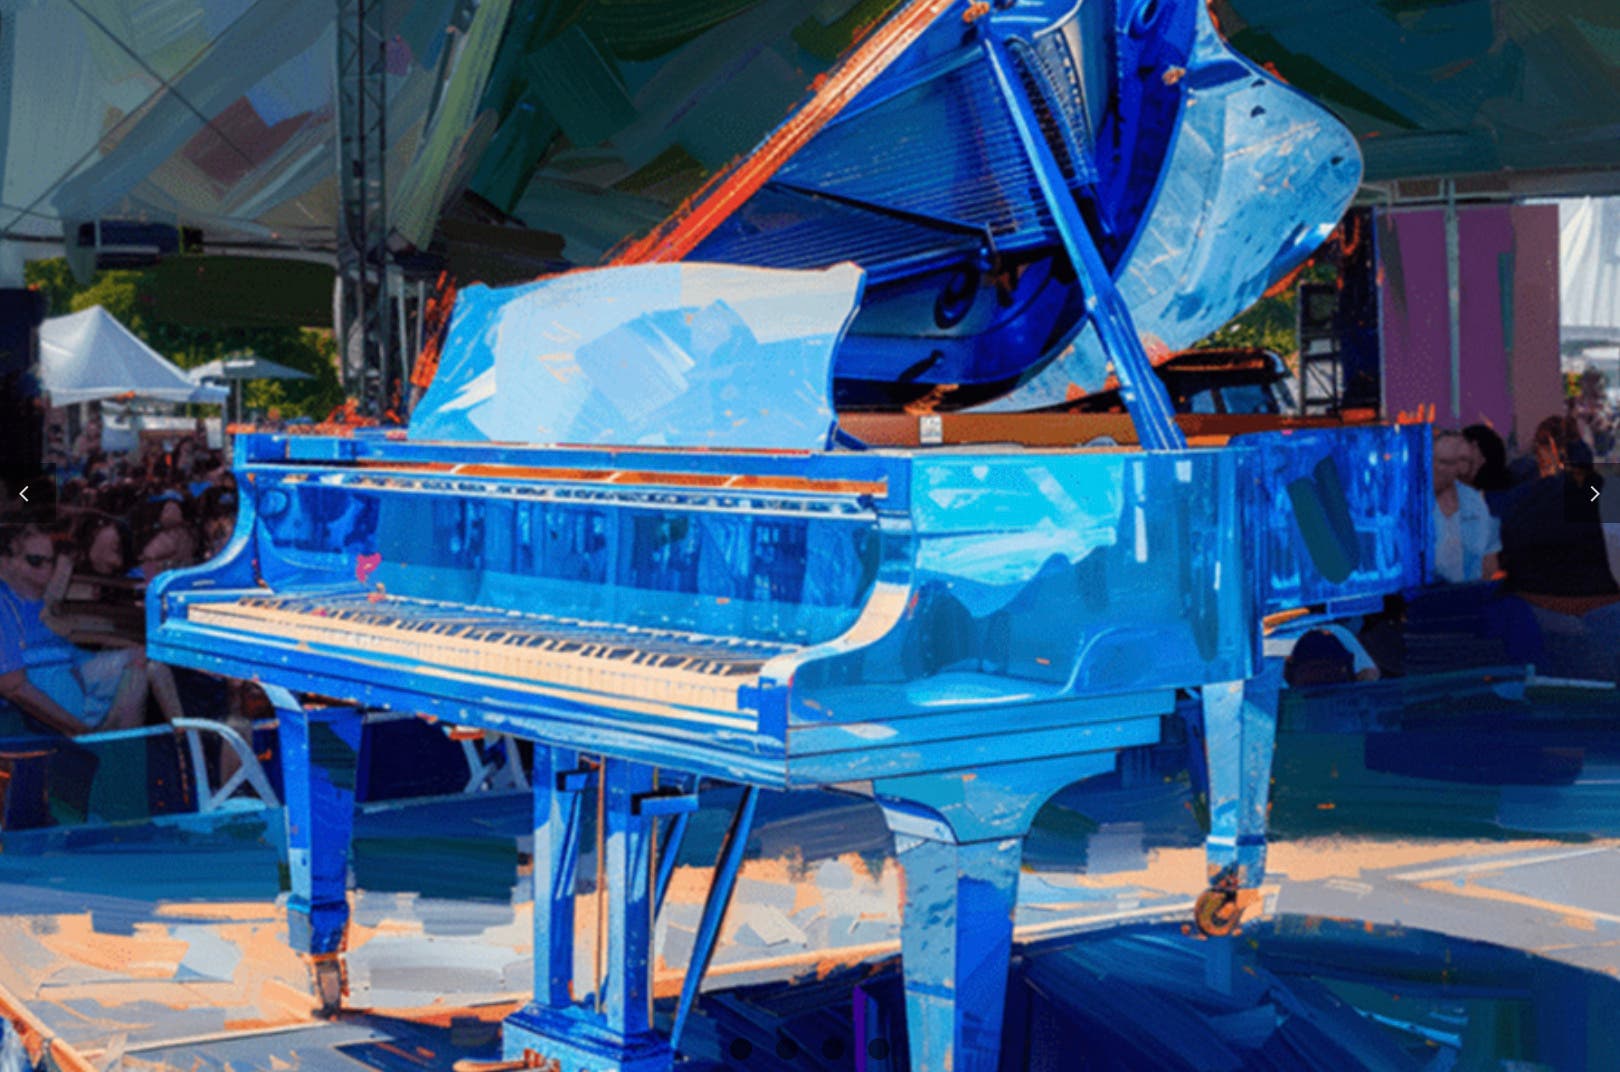 Spotlight on the Music of Hope Blue Piano at Festival of Arts